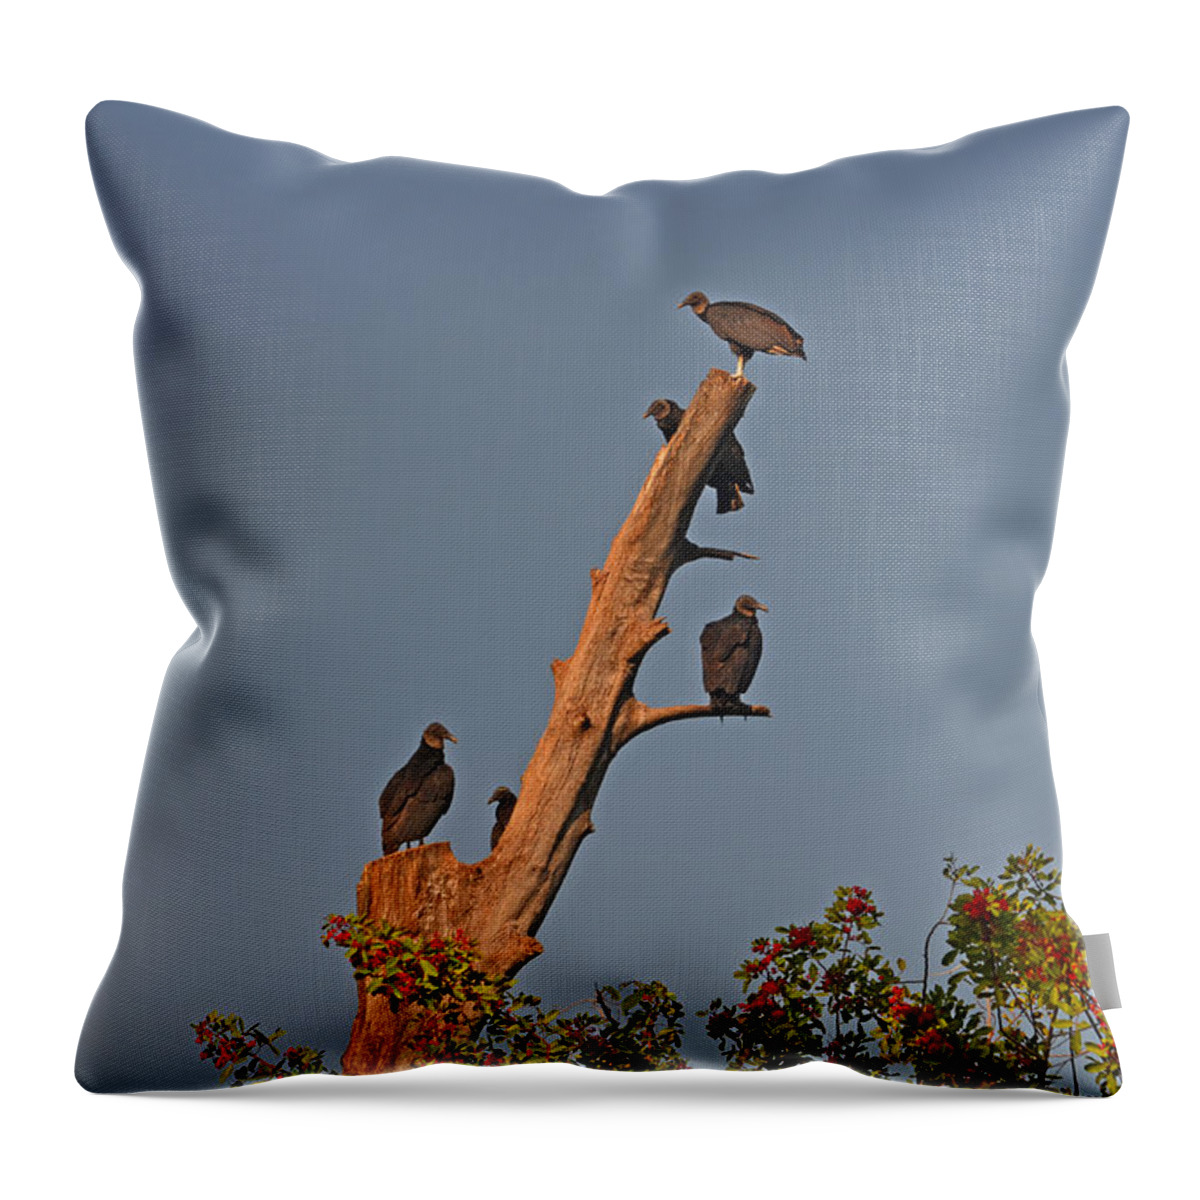  Throw Pillow featuring the photograph 4- Black Vultures by Joseph Keane